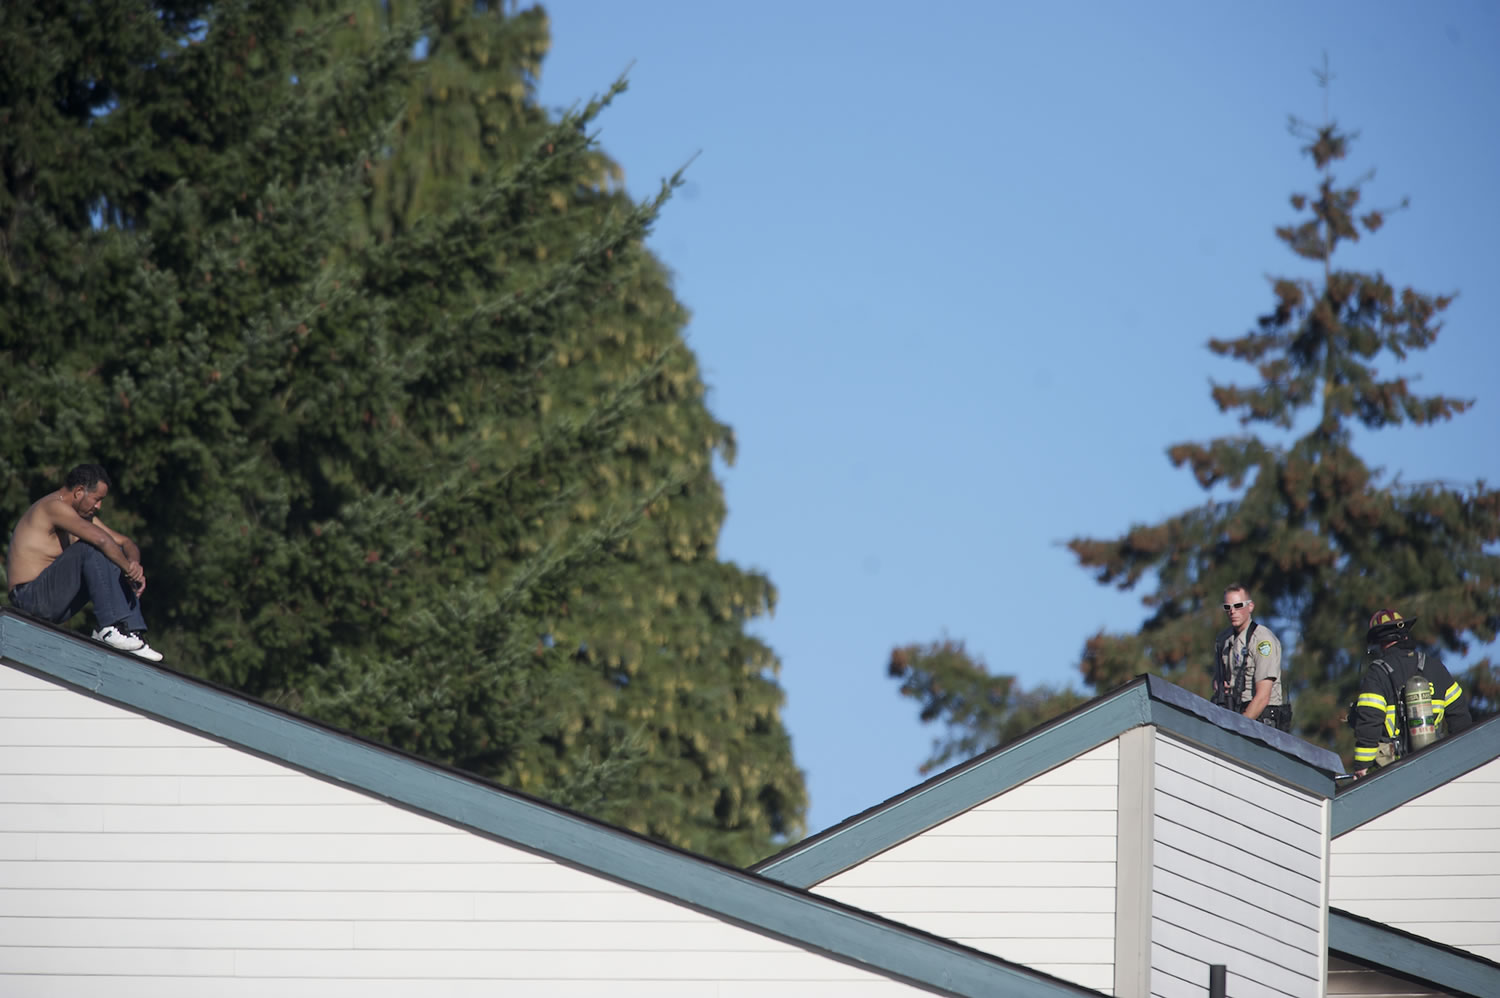 A sheriff's deputy keeps watch as a firefighter checks for hot spots the roof early into the four-hour standoff with Angel M.